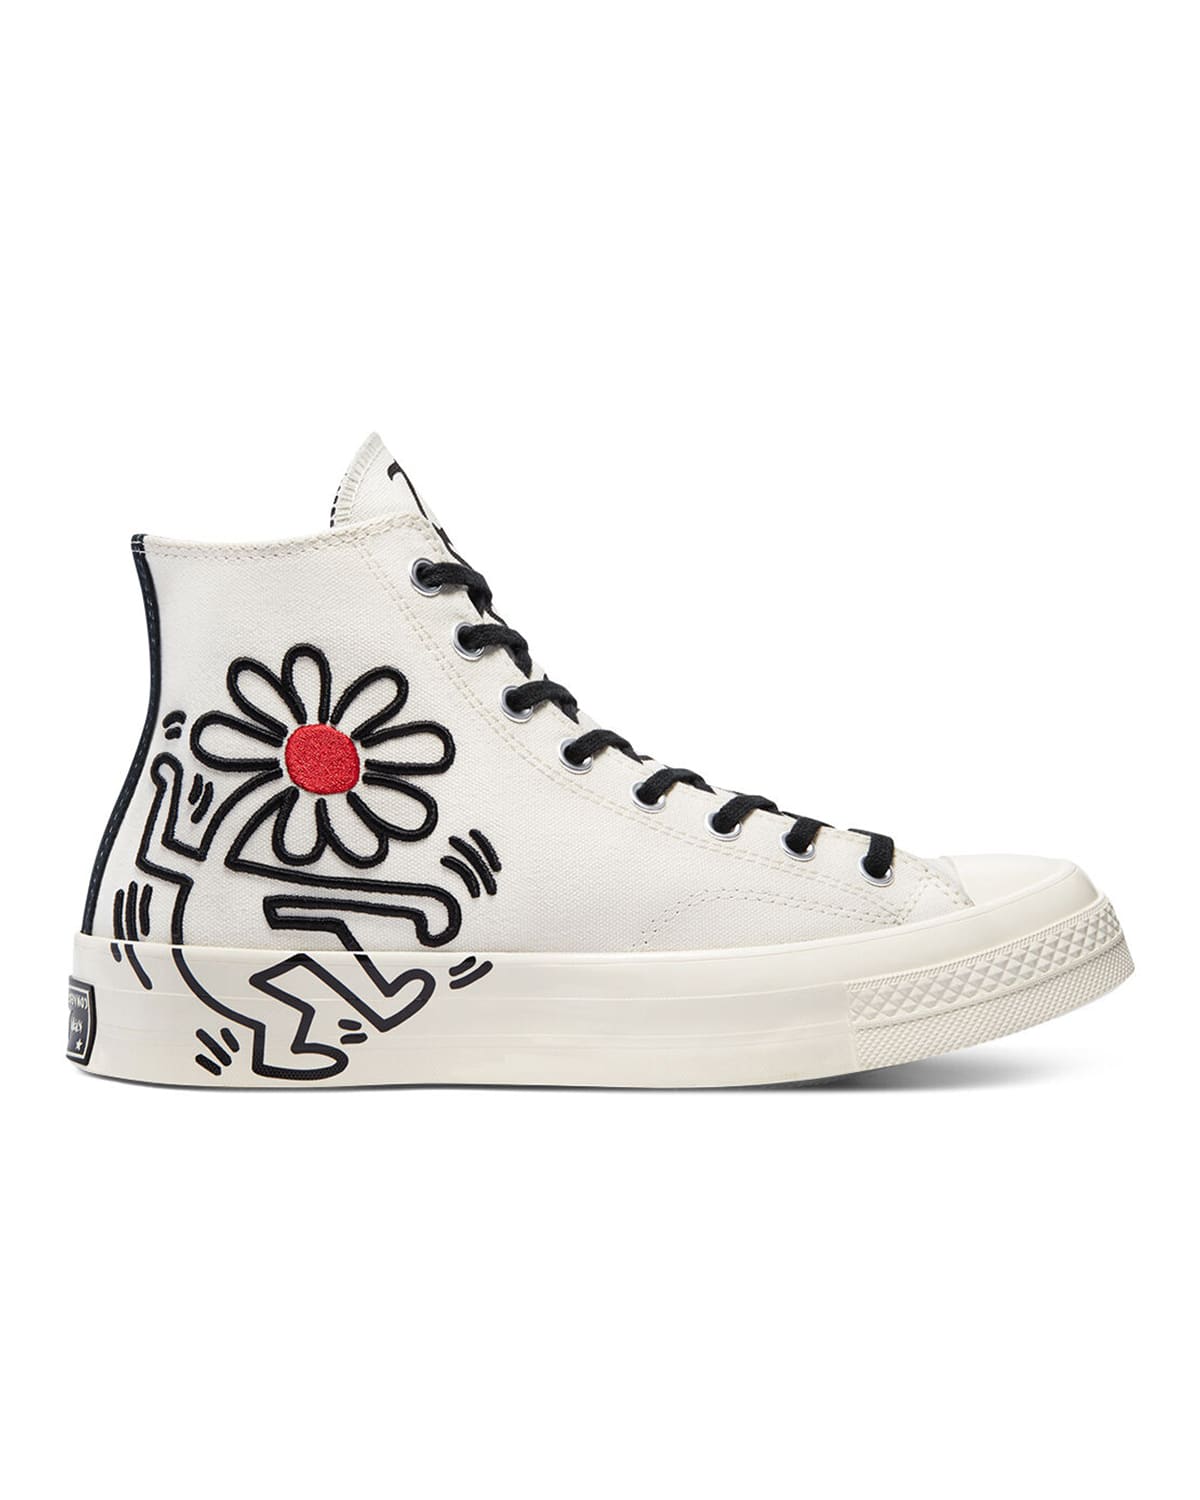 Keith Haring x Converse Collection | Shelflife